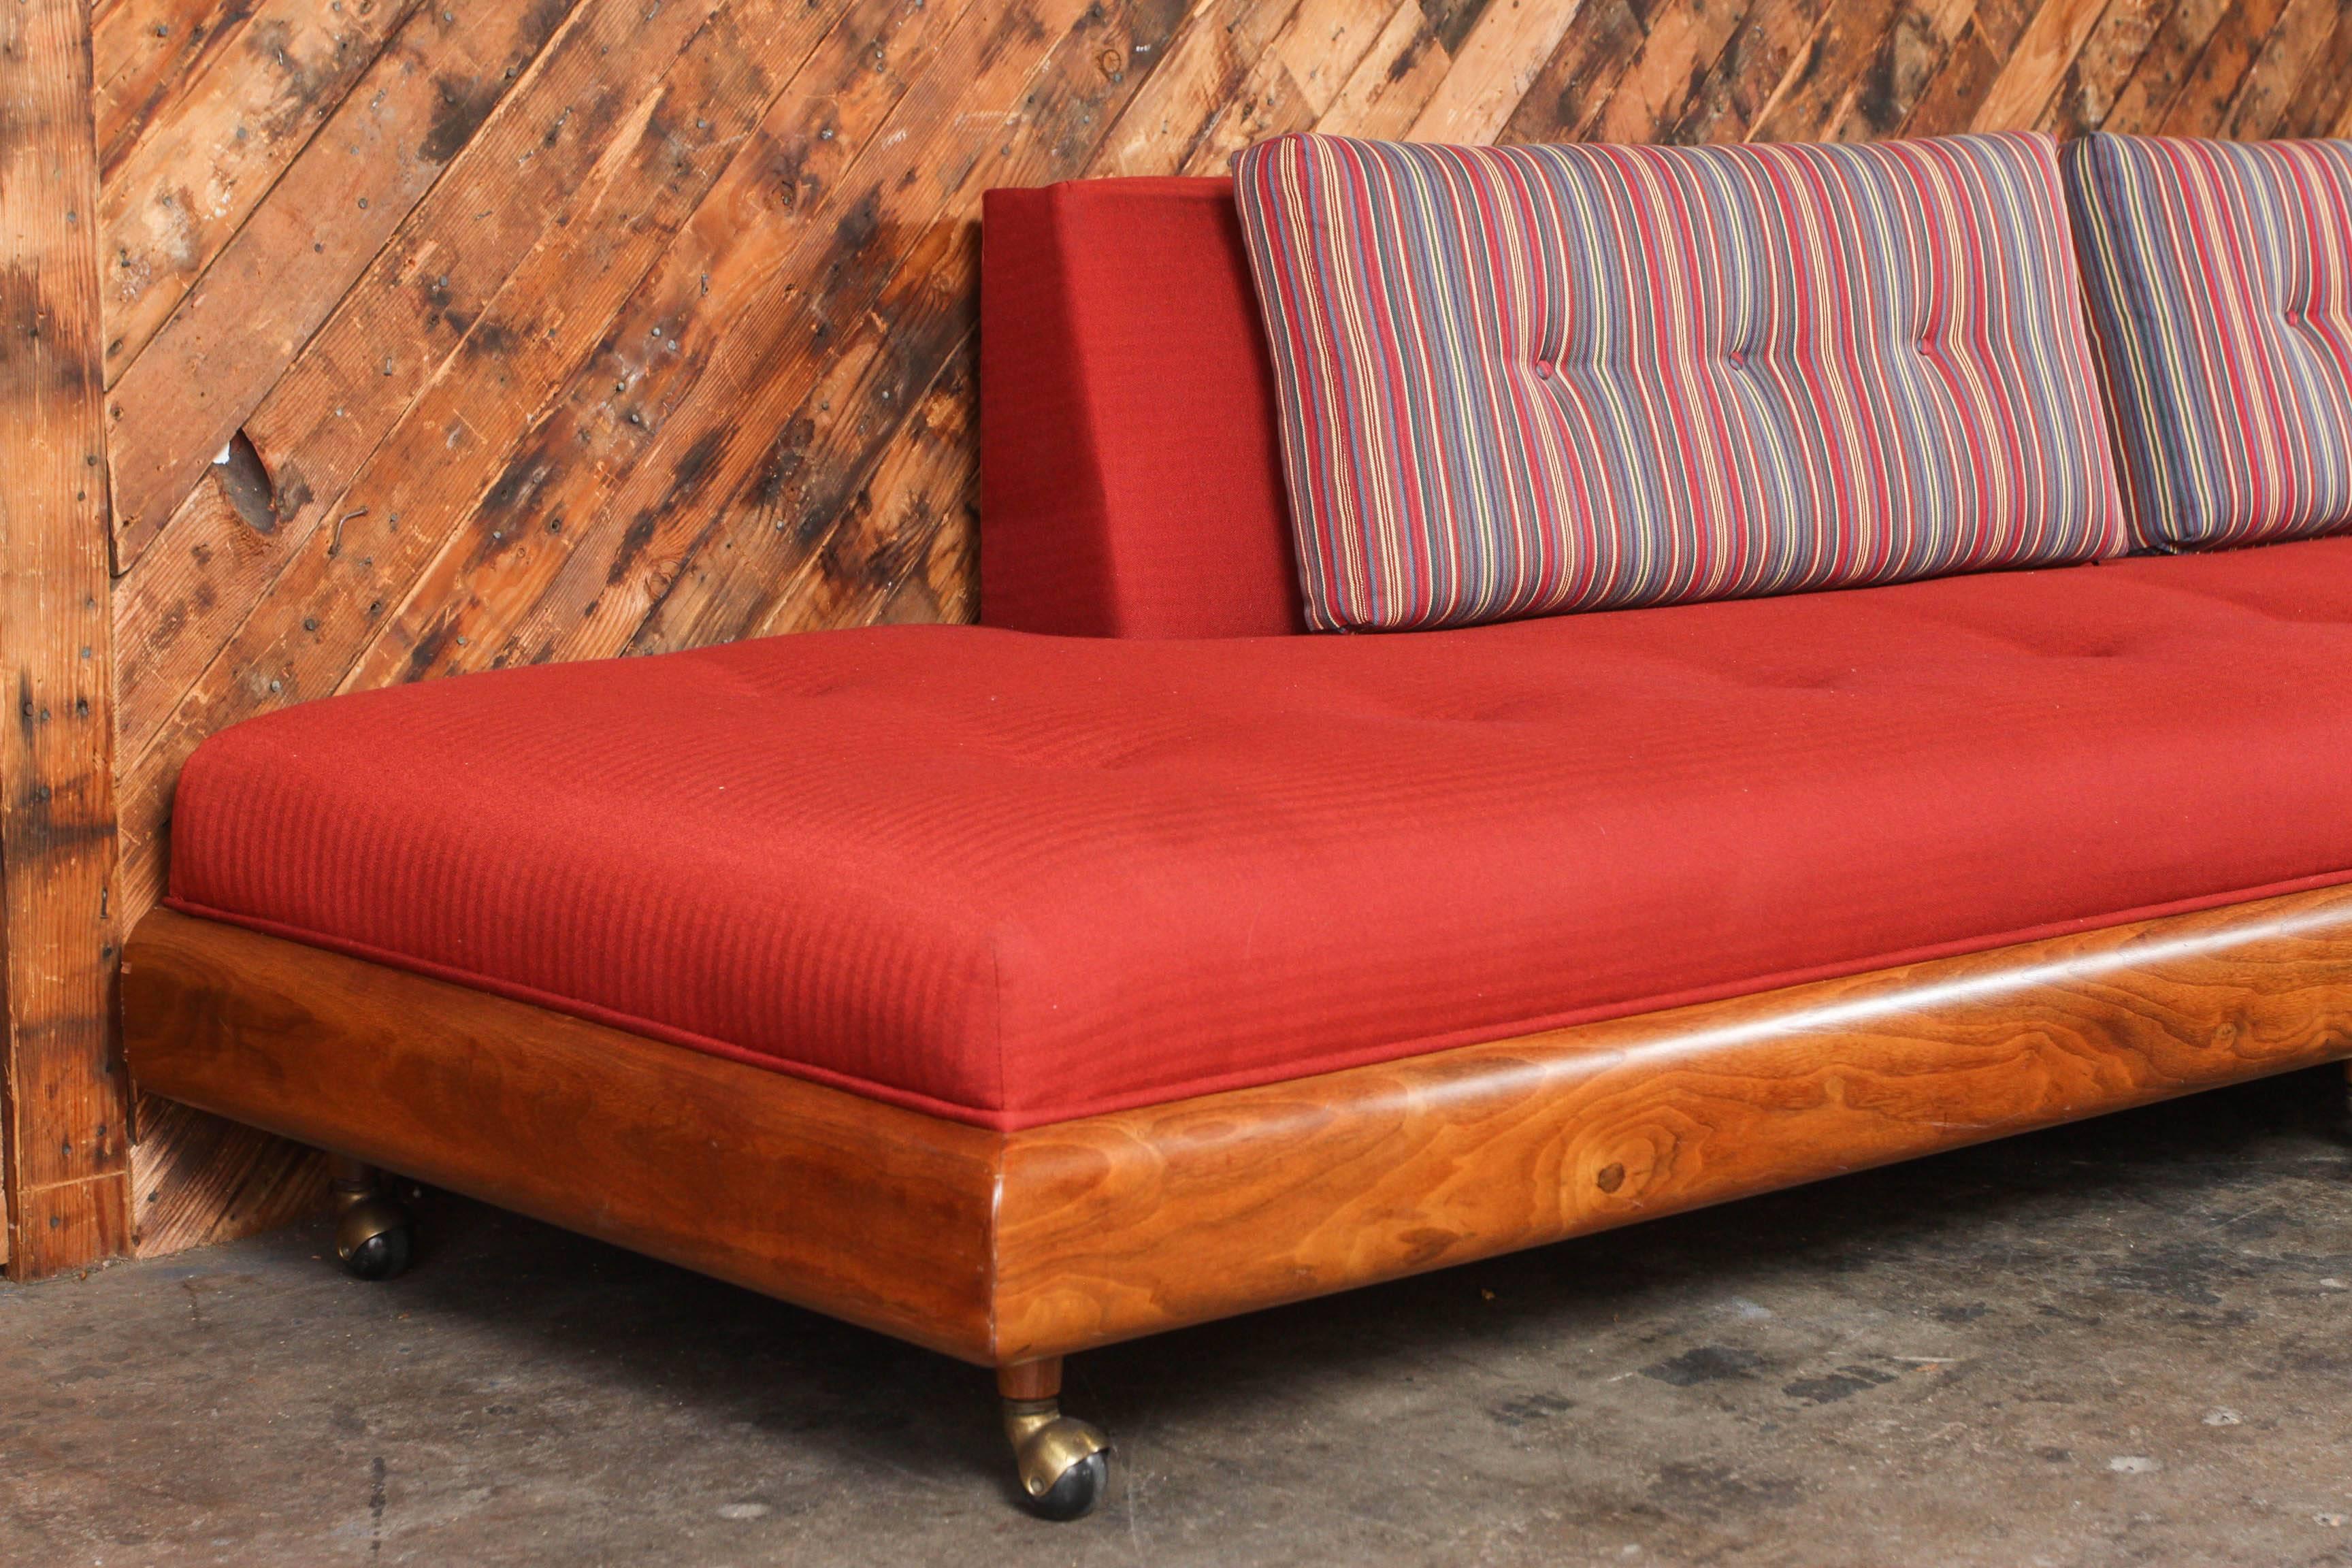 20th Century Adrian Pearsall Mid-Century Boomerang Sofa with Matching Coffee Table, 1964